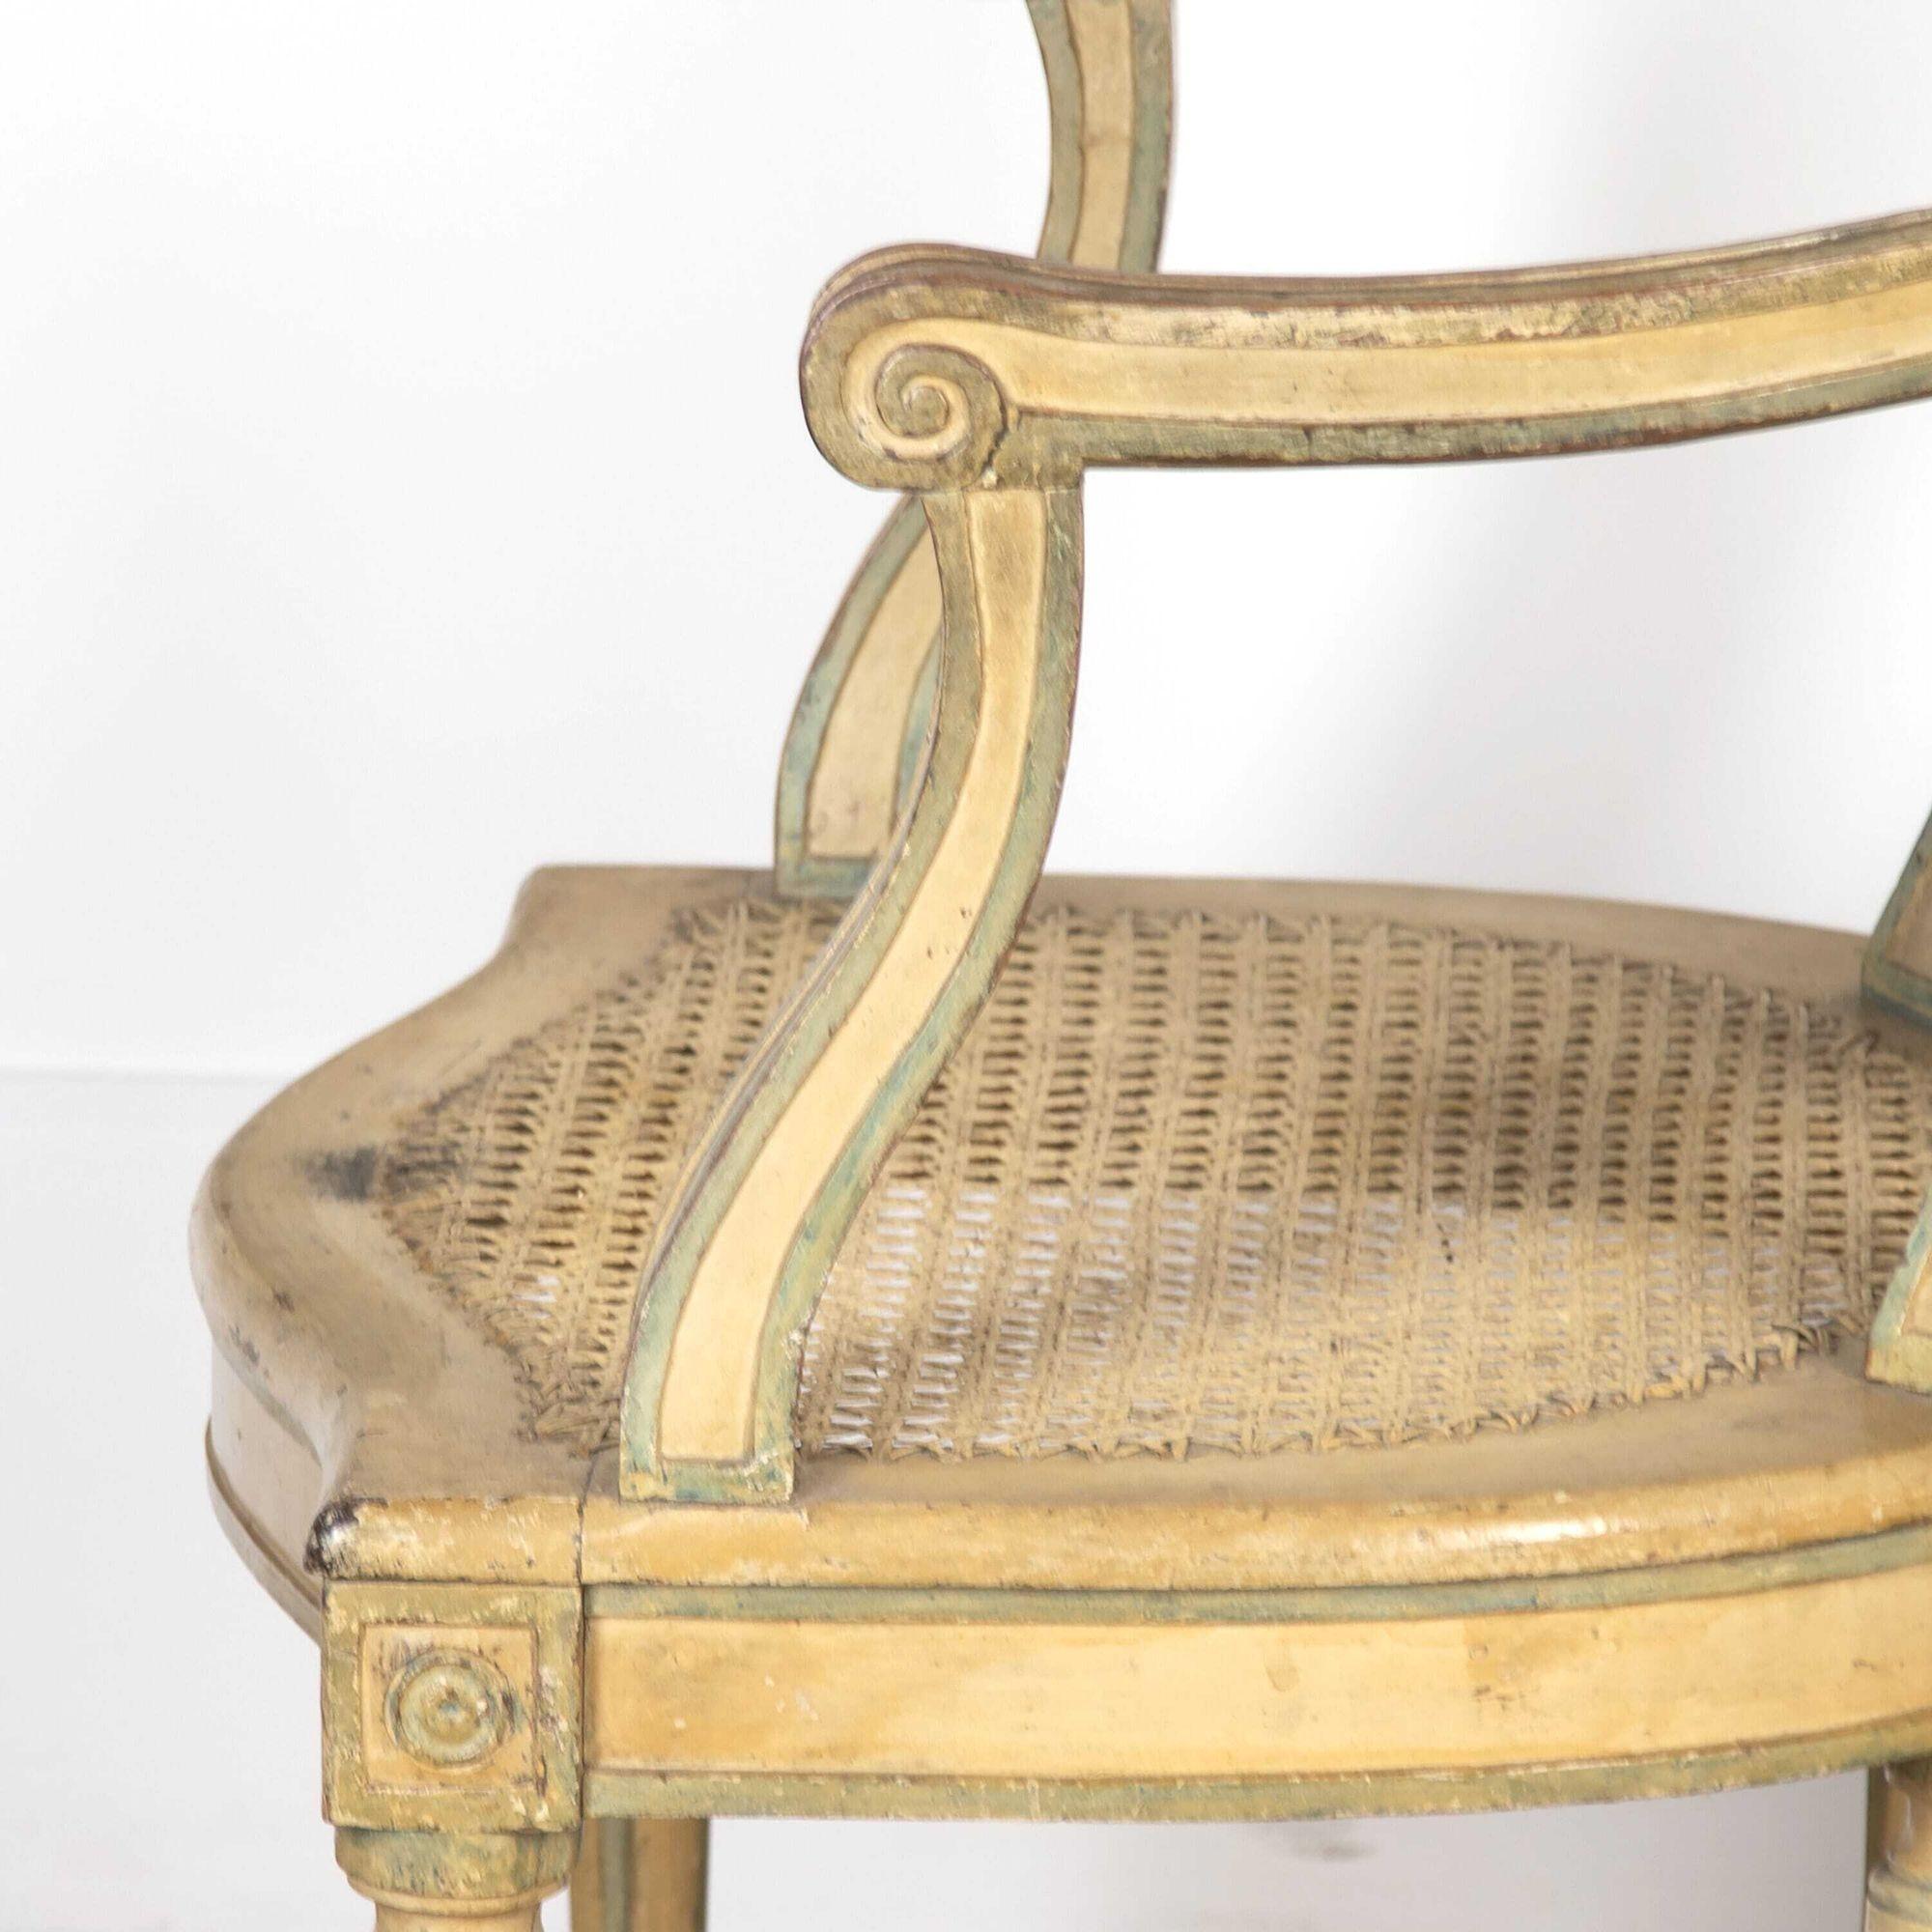 Superb pair of late 18th Century caned armchairs in old paint.
In good, stable condition, the seats and backs have been re-caned and feature very few signs of wear. 
Would look lovely within a bedroom or dressing room setting.